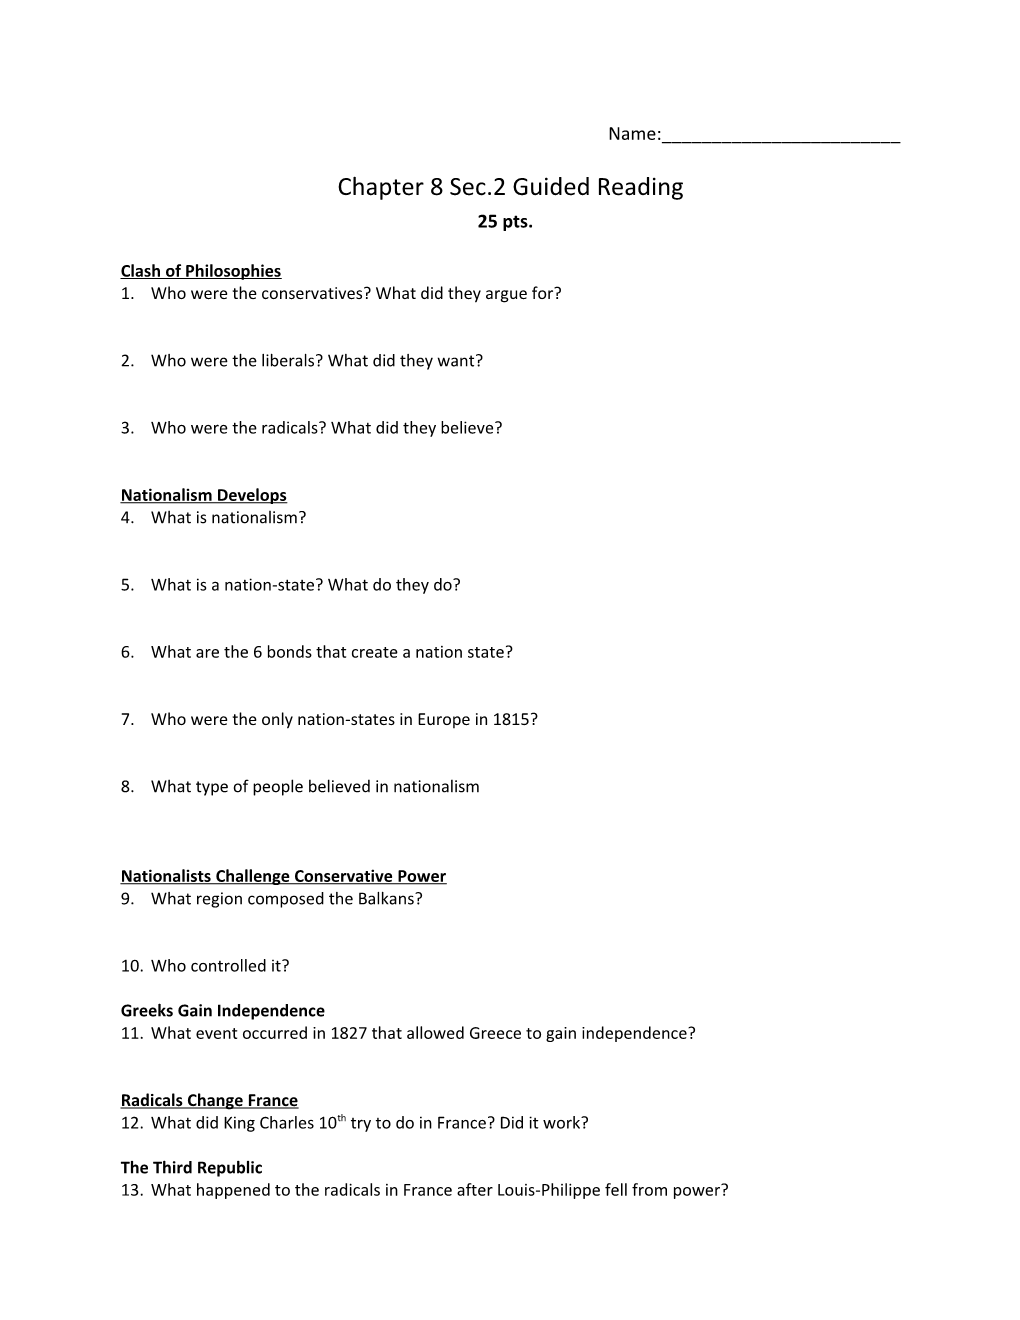 Chapter 8 Sec.2 Guided Reading